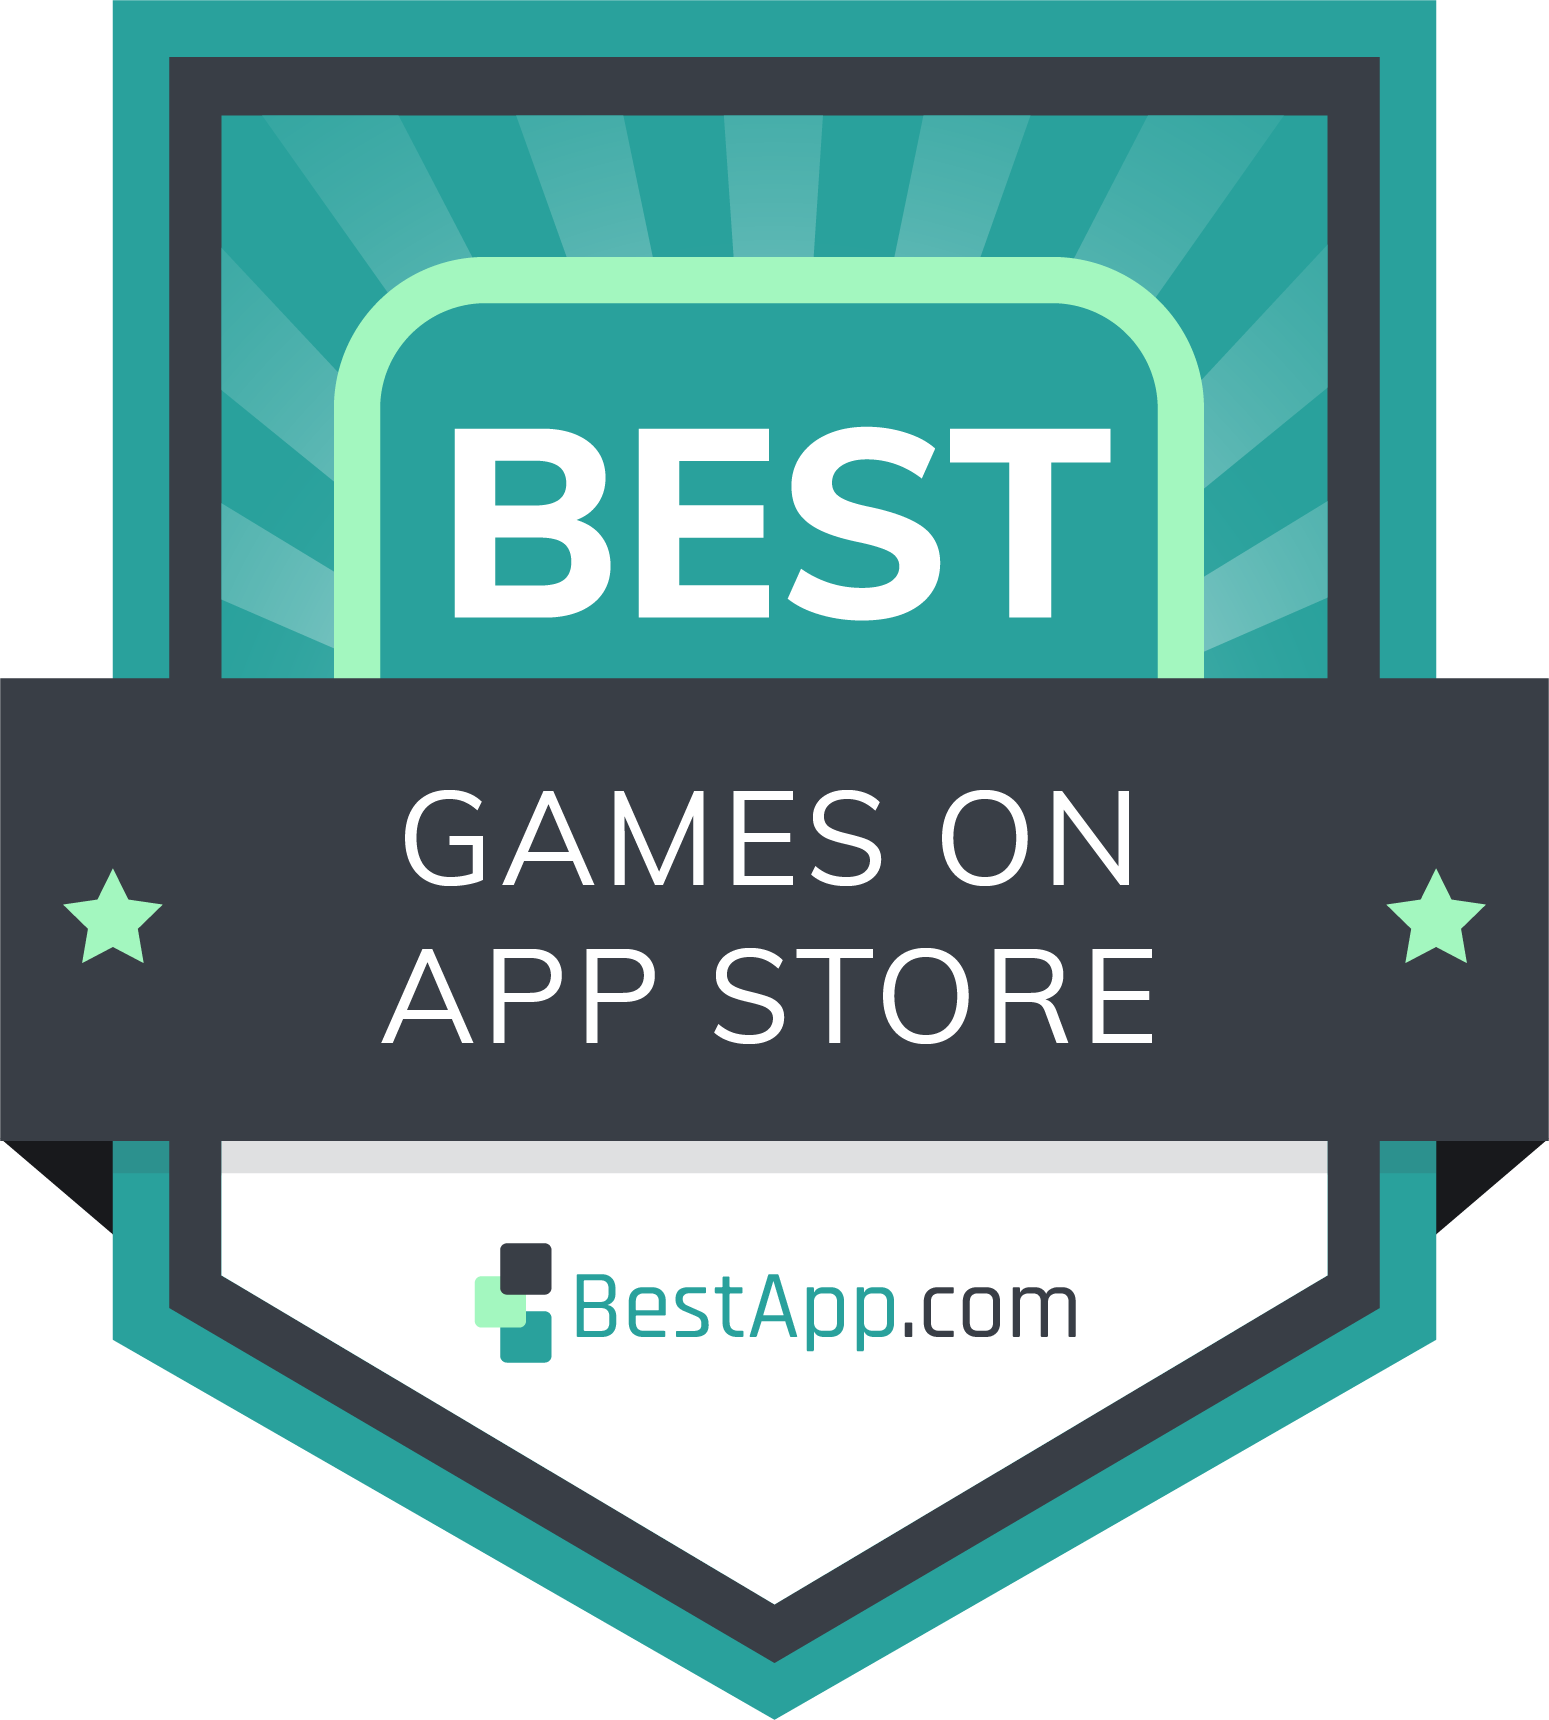 Best Games on the App Store Badge